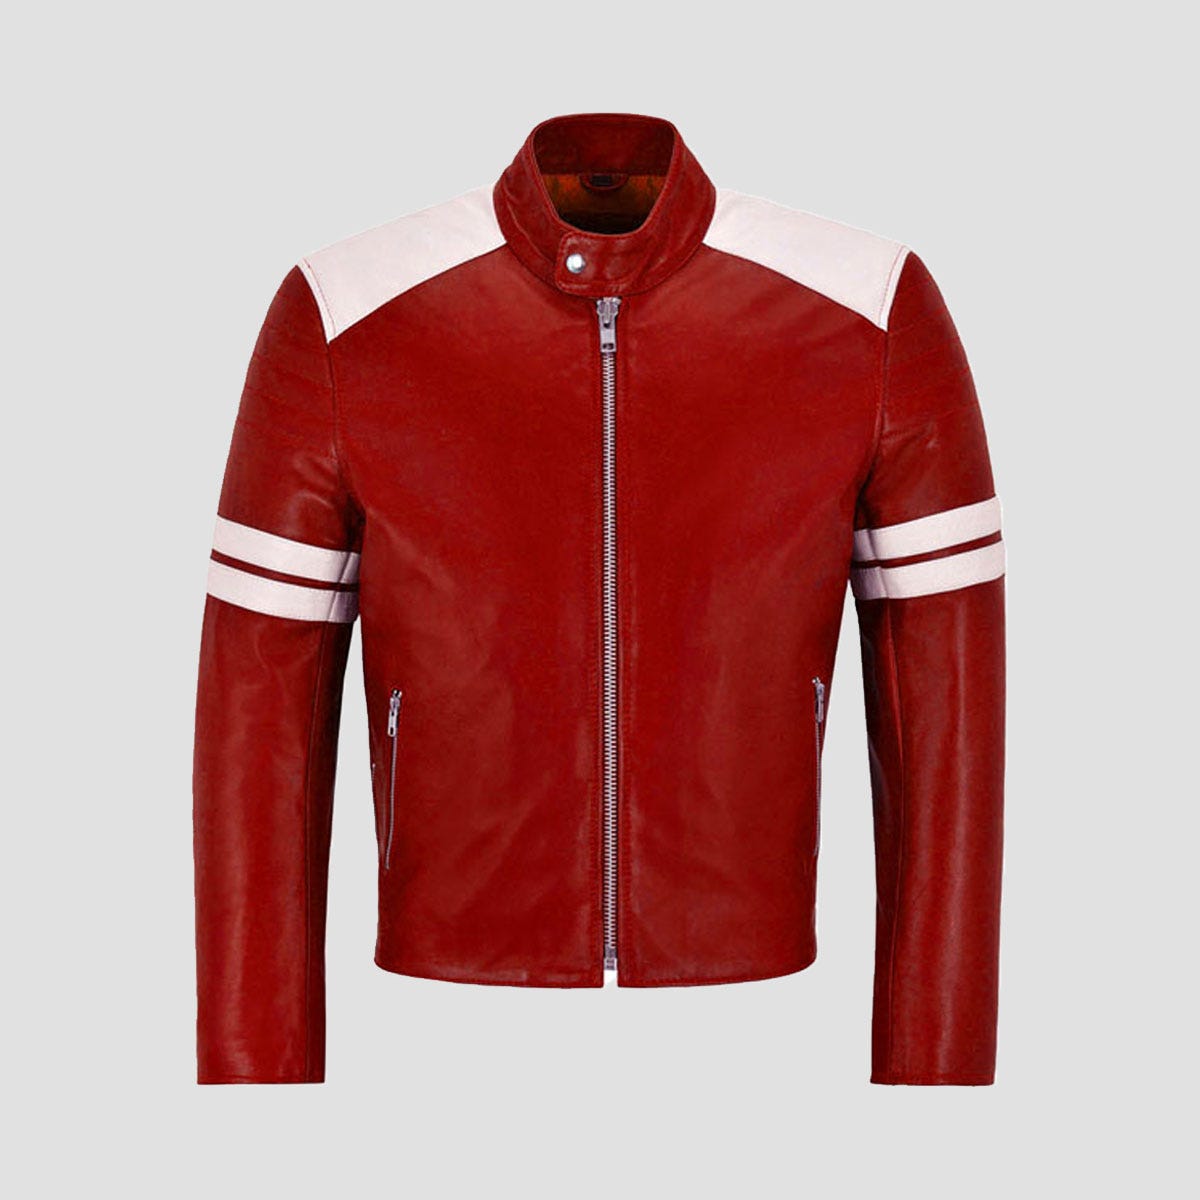 Leather Racing Jacket Red & White for Men in USA | The Vintage Leather ...